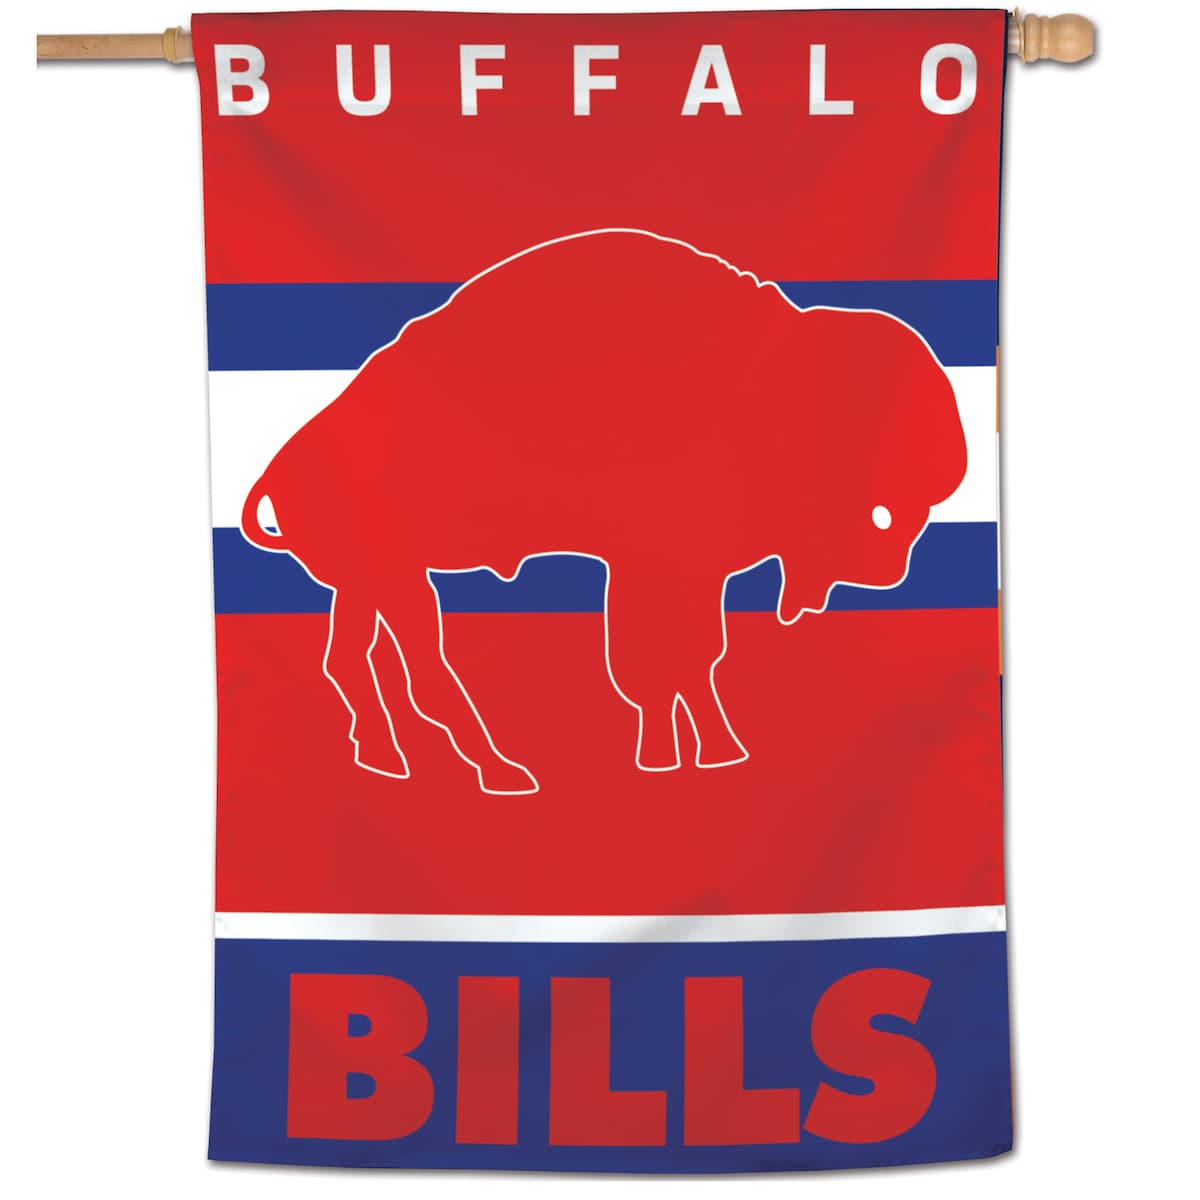 Proudly show off your hardcore fandom when you hang up this Buffalo Bills 28" x 40" Retro Single-Sided Vertical Banner from WinCraft. The vibrant team graphics let everyone know they're walking into Buffalo Bills territory.Made in the USADimensions are approximately 28" x 40"Brand: WinCraftPole sleeve at top (pole not included)Machine wash, tumble dry lowFor indoor or outdoor useSingle-sided designMaterial: 100% PolyesterSublimated graphicsOfficially licensed